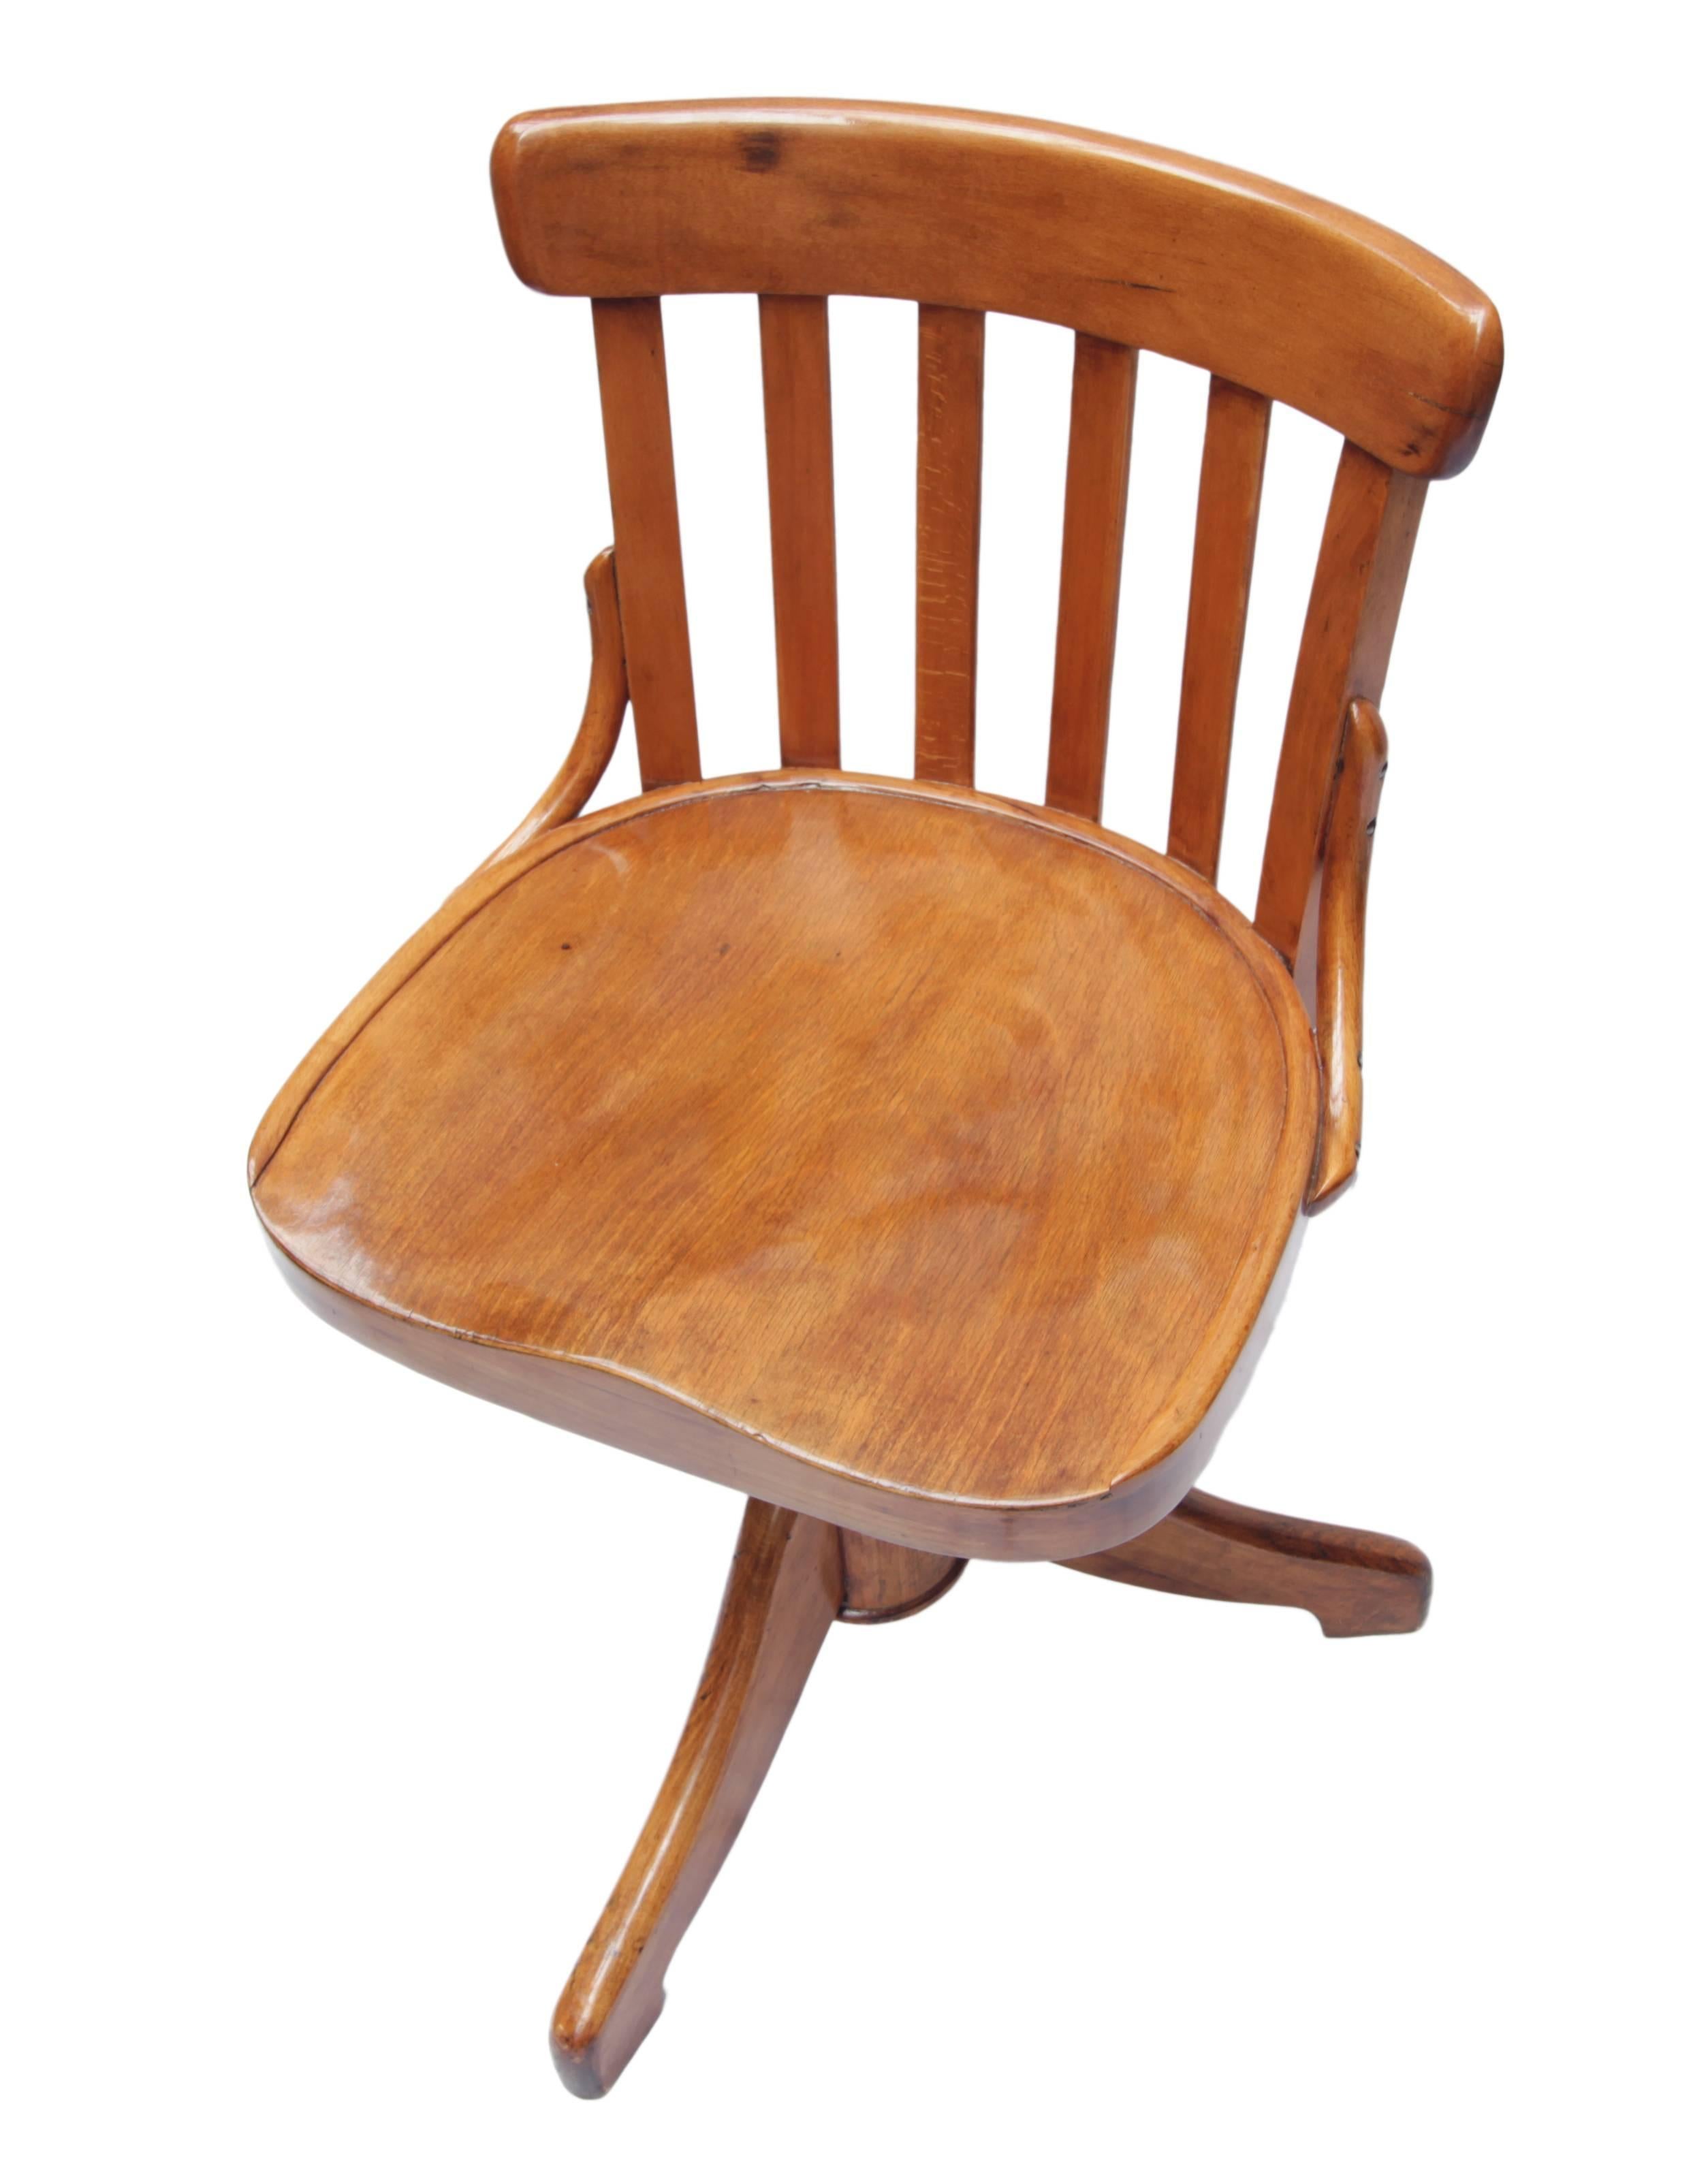 Polished Art Nouveau Soild Beechwood Chair to Turn for Height Adjustable For Sale